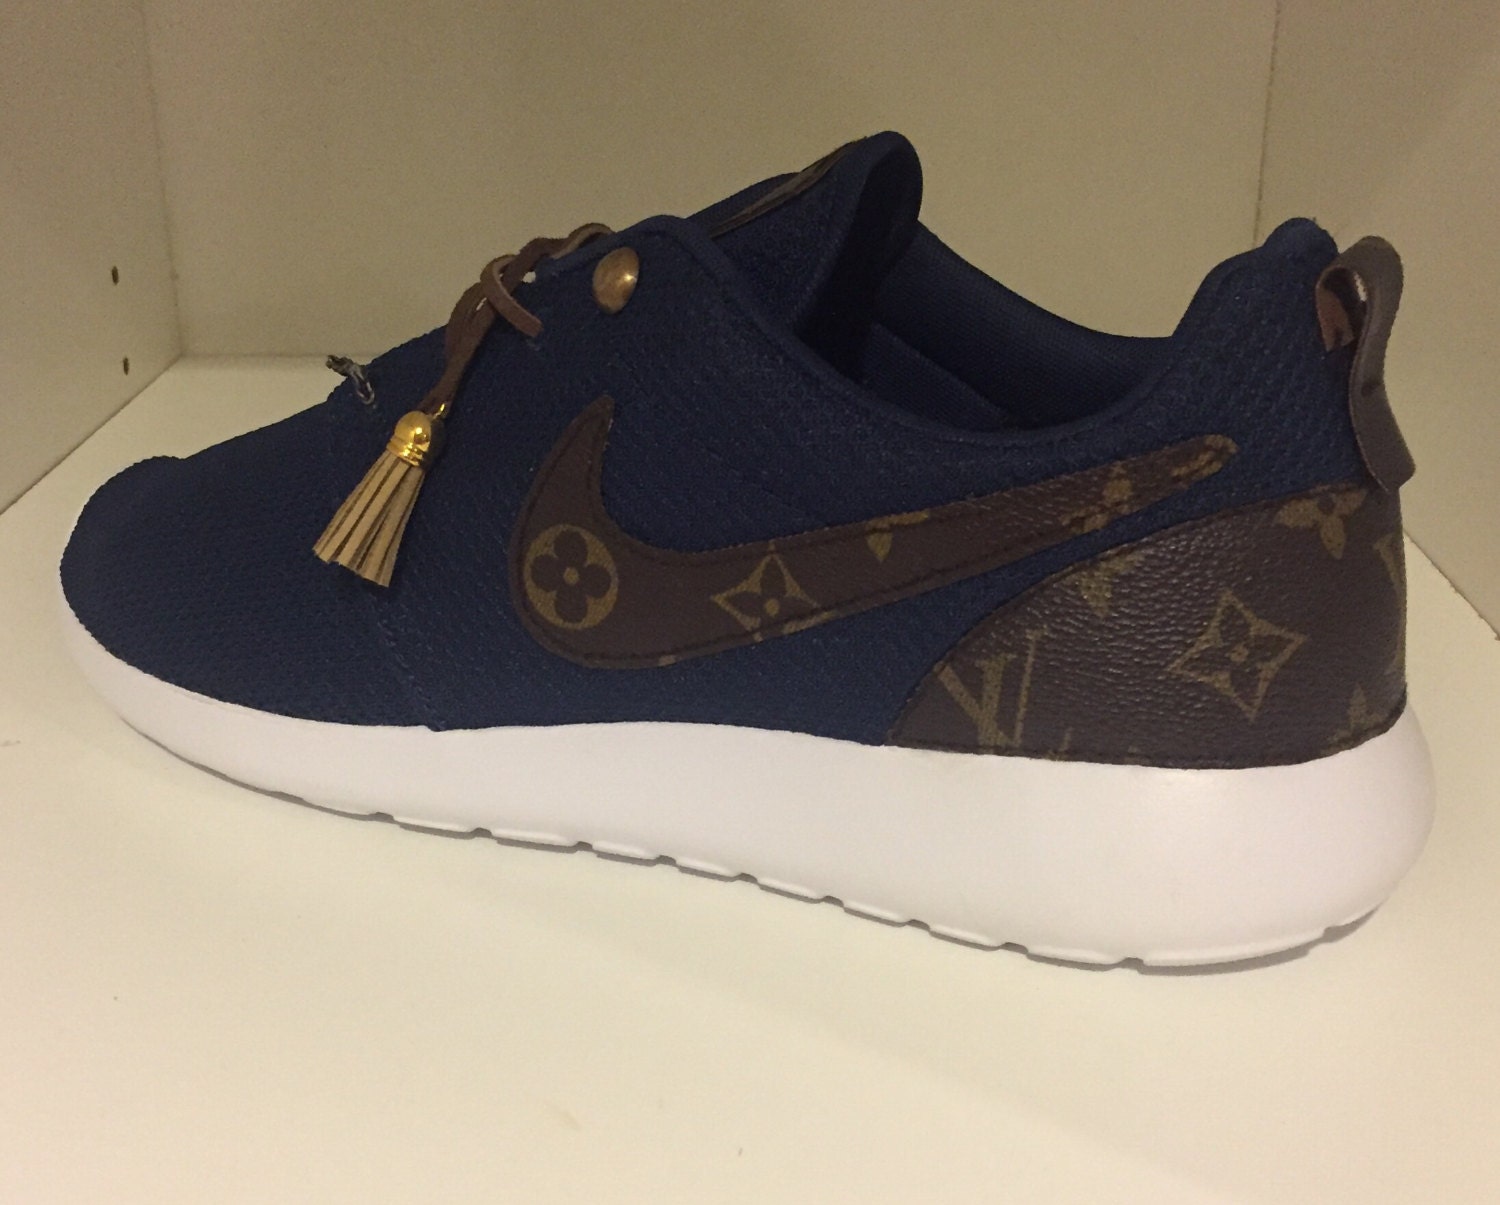 Custom Nike roshe run with Louis Vuitton fabric by JFTMG on Etsy